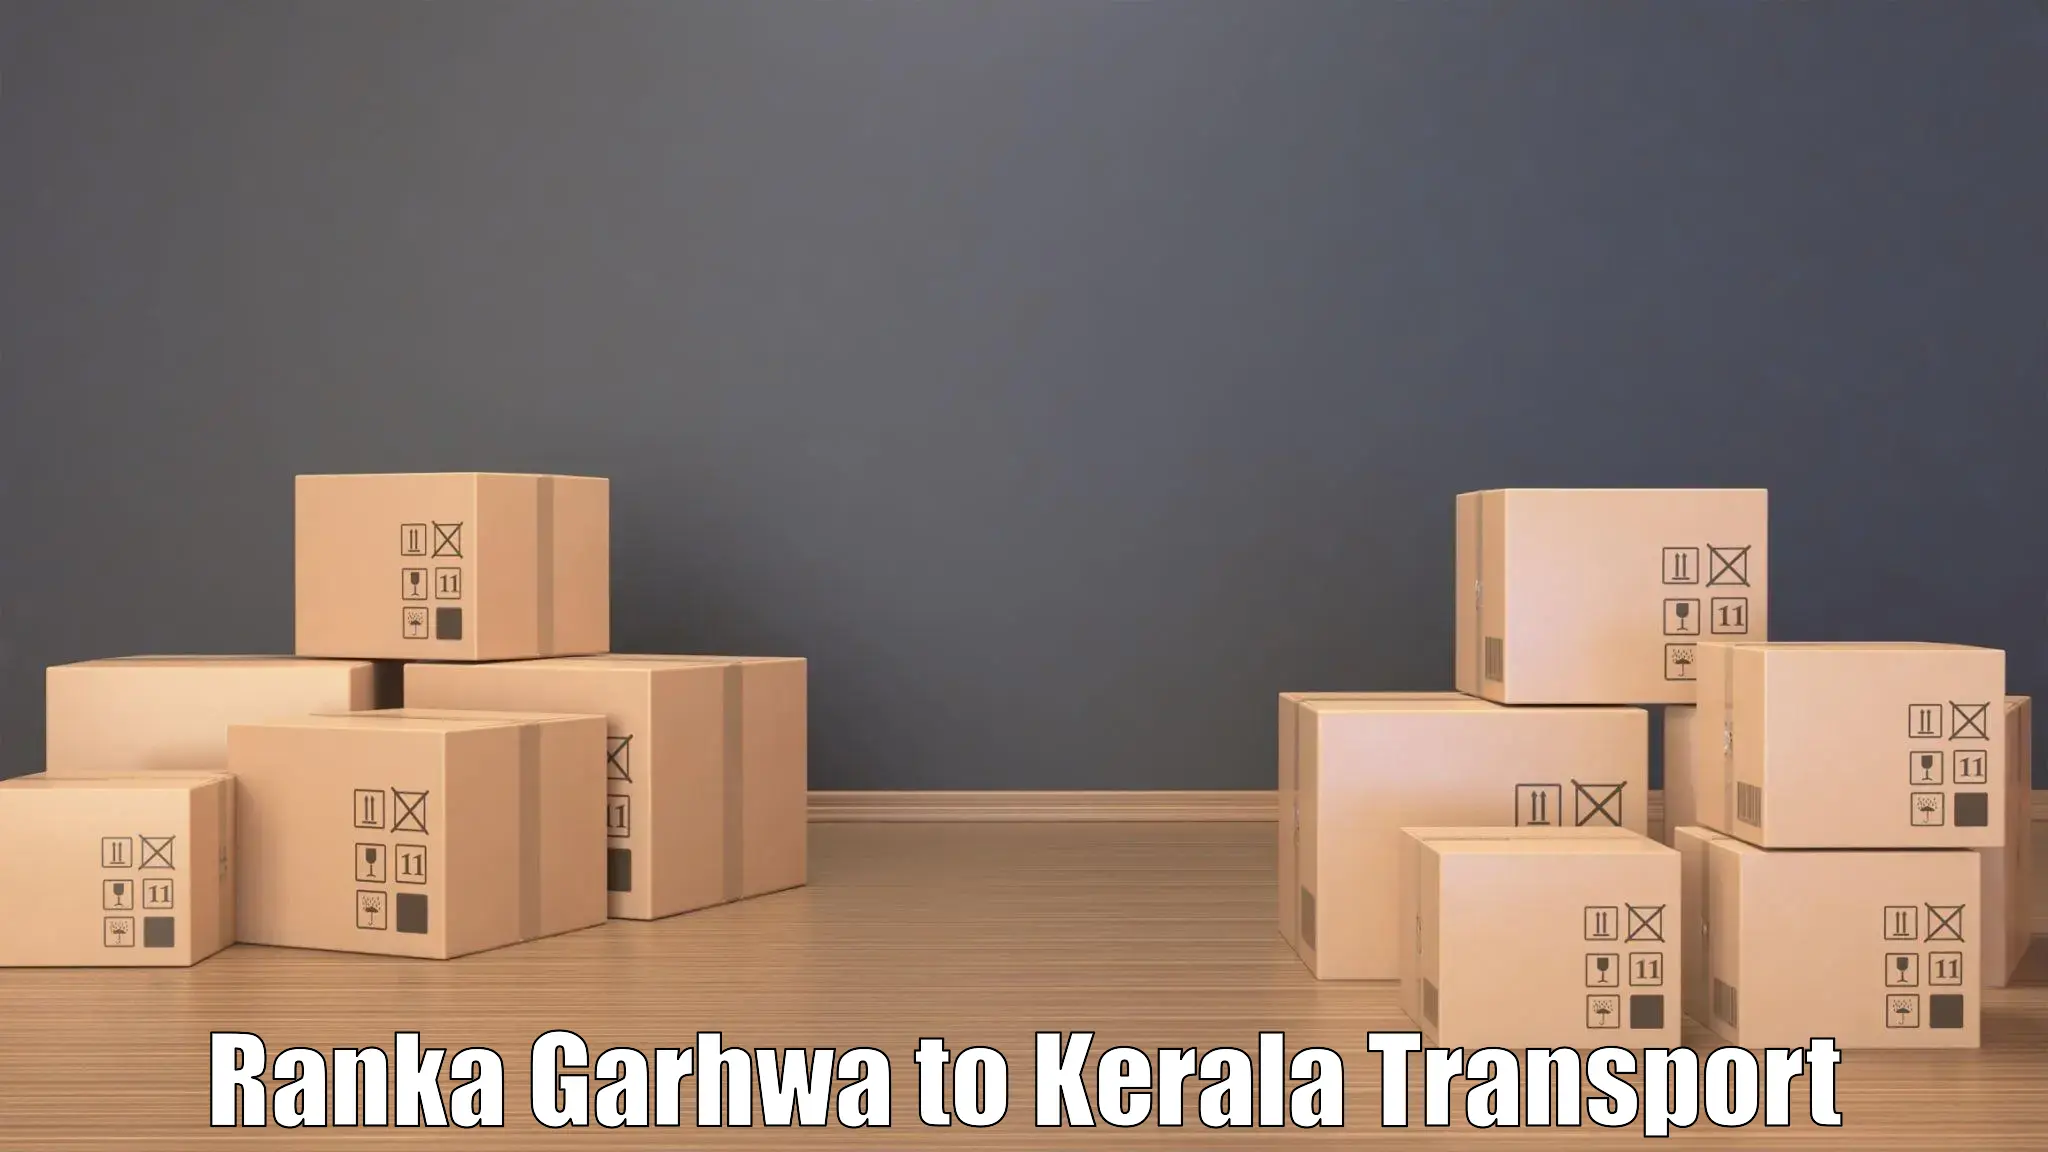 Transport bike from one state to another Ranka Garhwa to Trivandrum